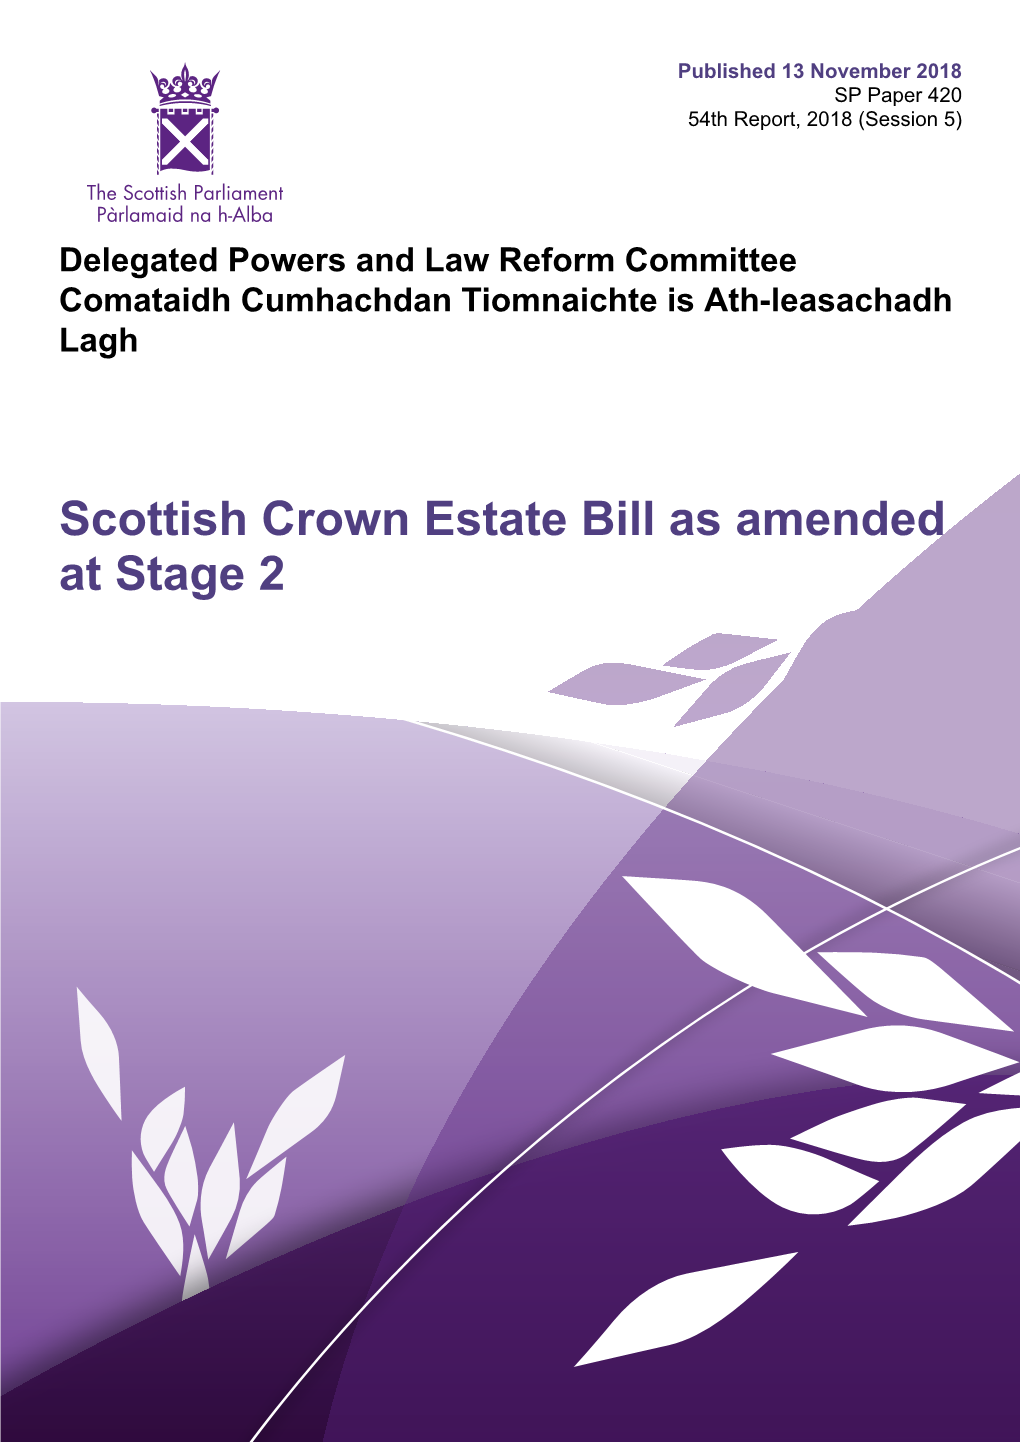 Scottish Crown Estate Bill As Amended at Stage 2 Published in Scotland by the Scottish Parliamentary Corporate Body